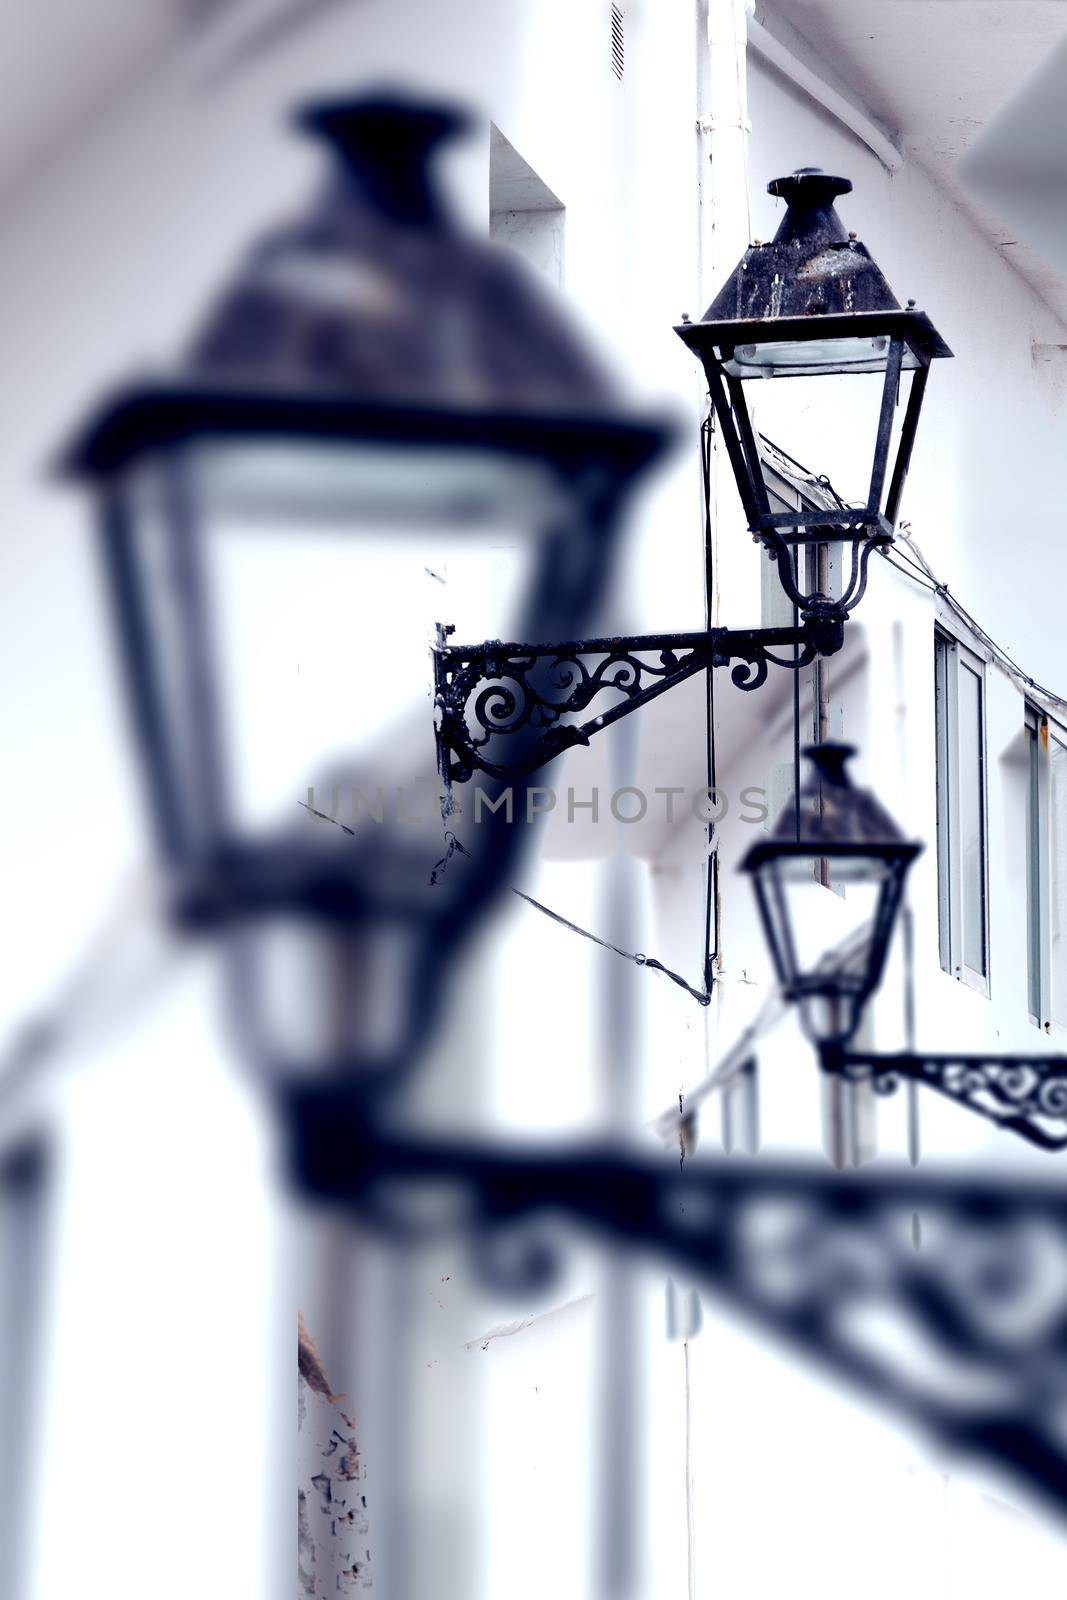 City and old streetlight detail.Town and urban architecture